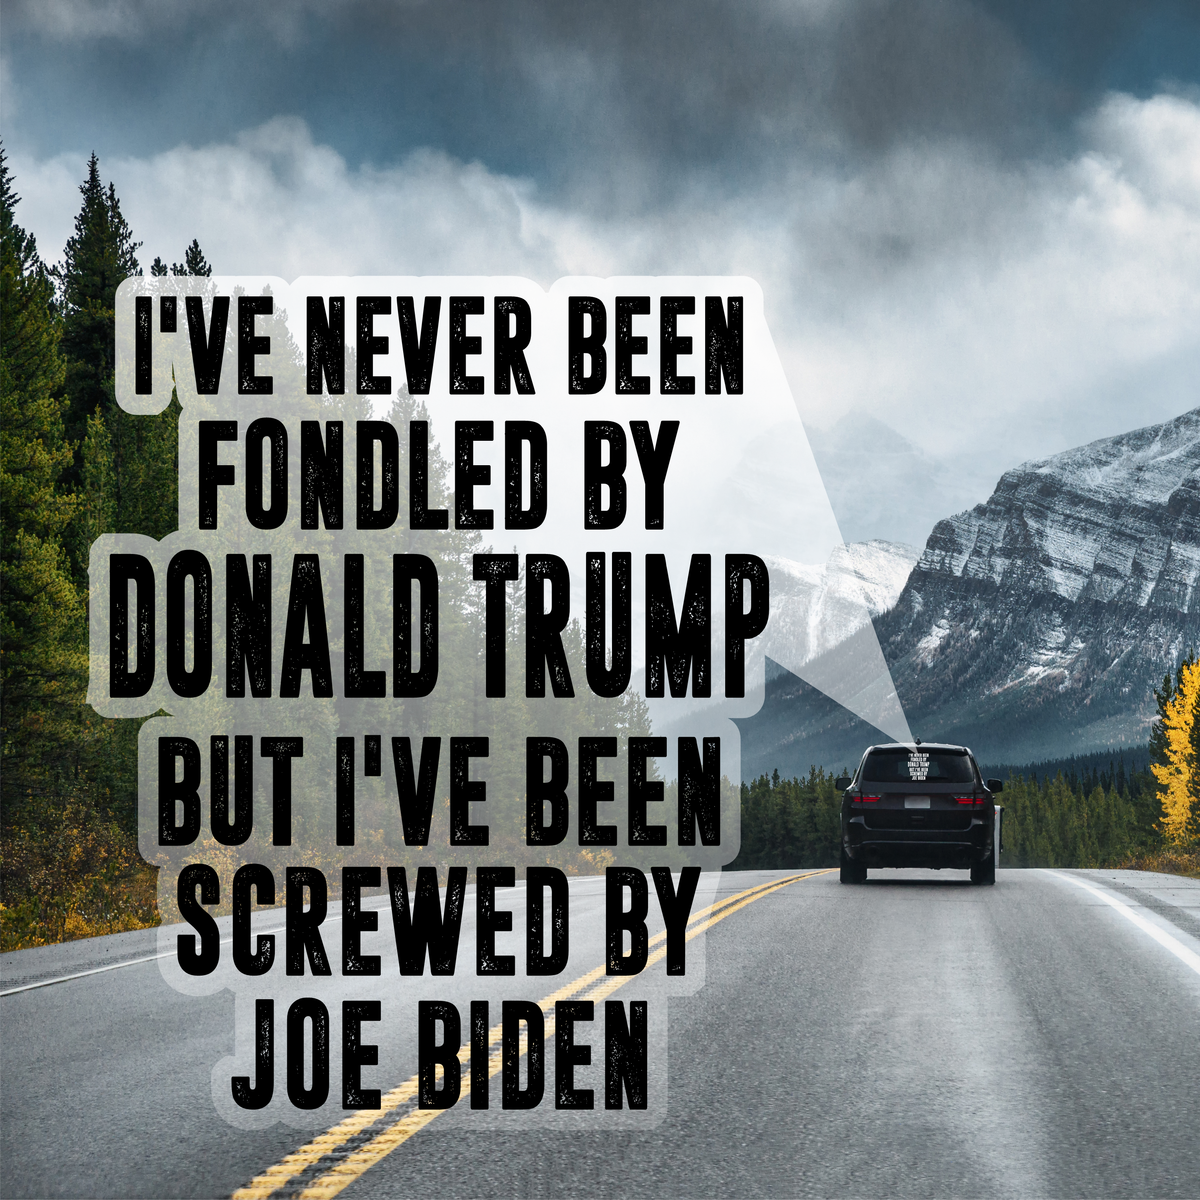 Never Been Fondled by Trump - Screwed by Biden - PermaSticker - Free Shipping - Application Video in Description